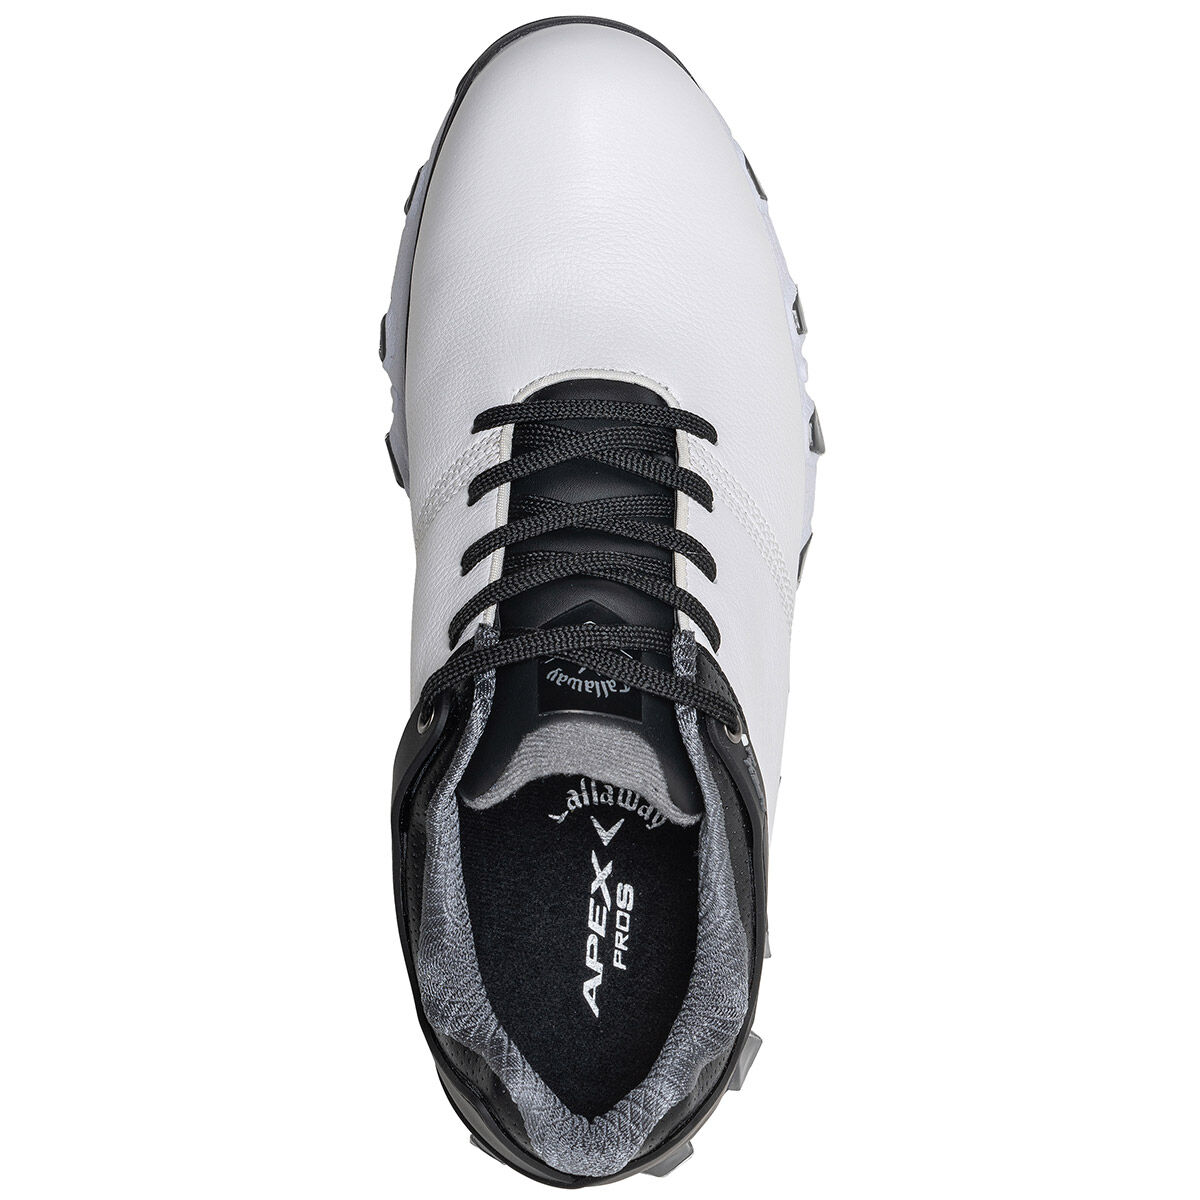 Callaway Golf Apex Pro S Shoes from 